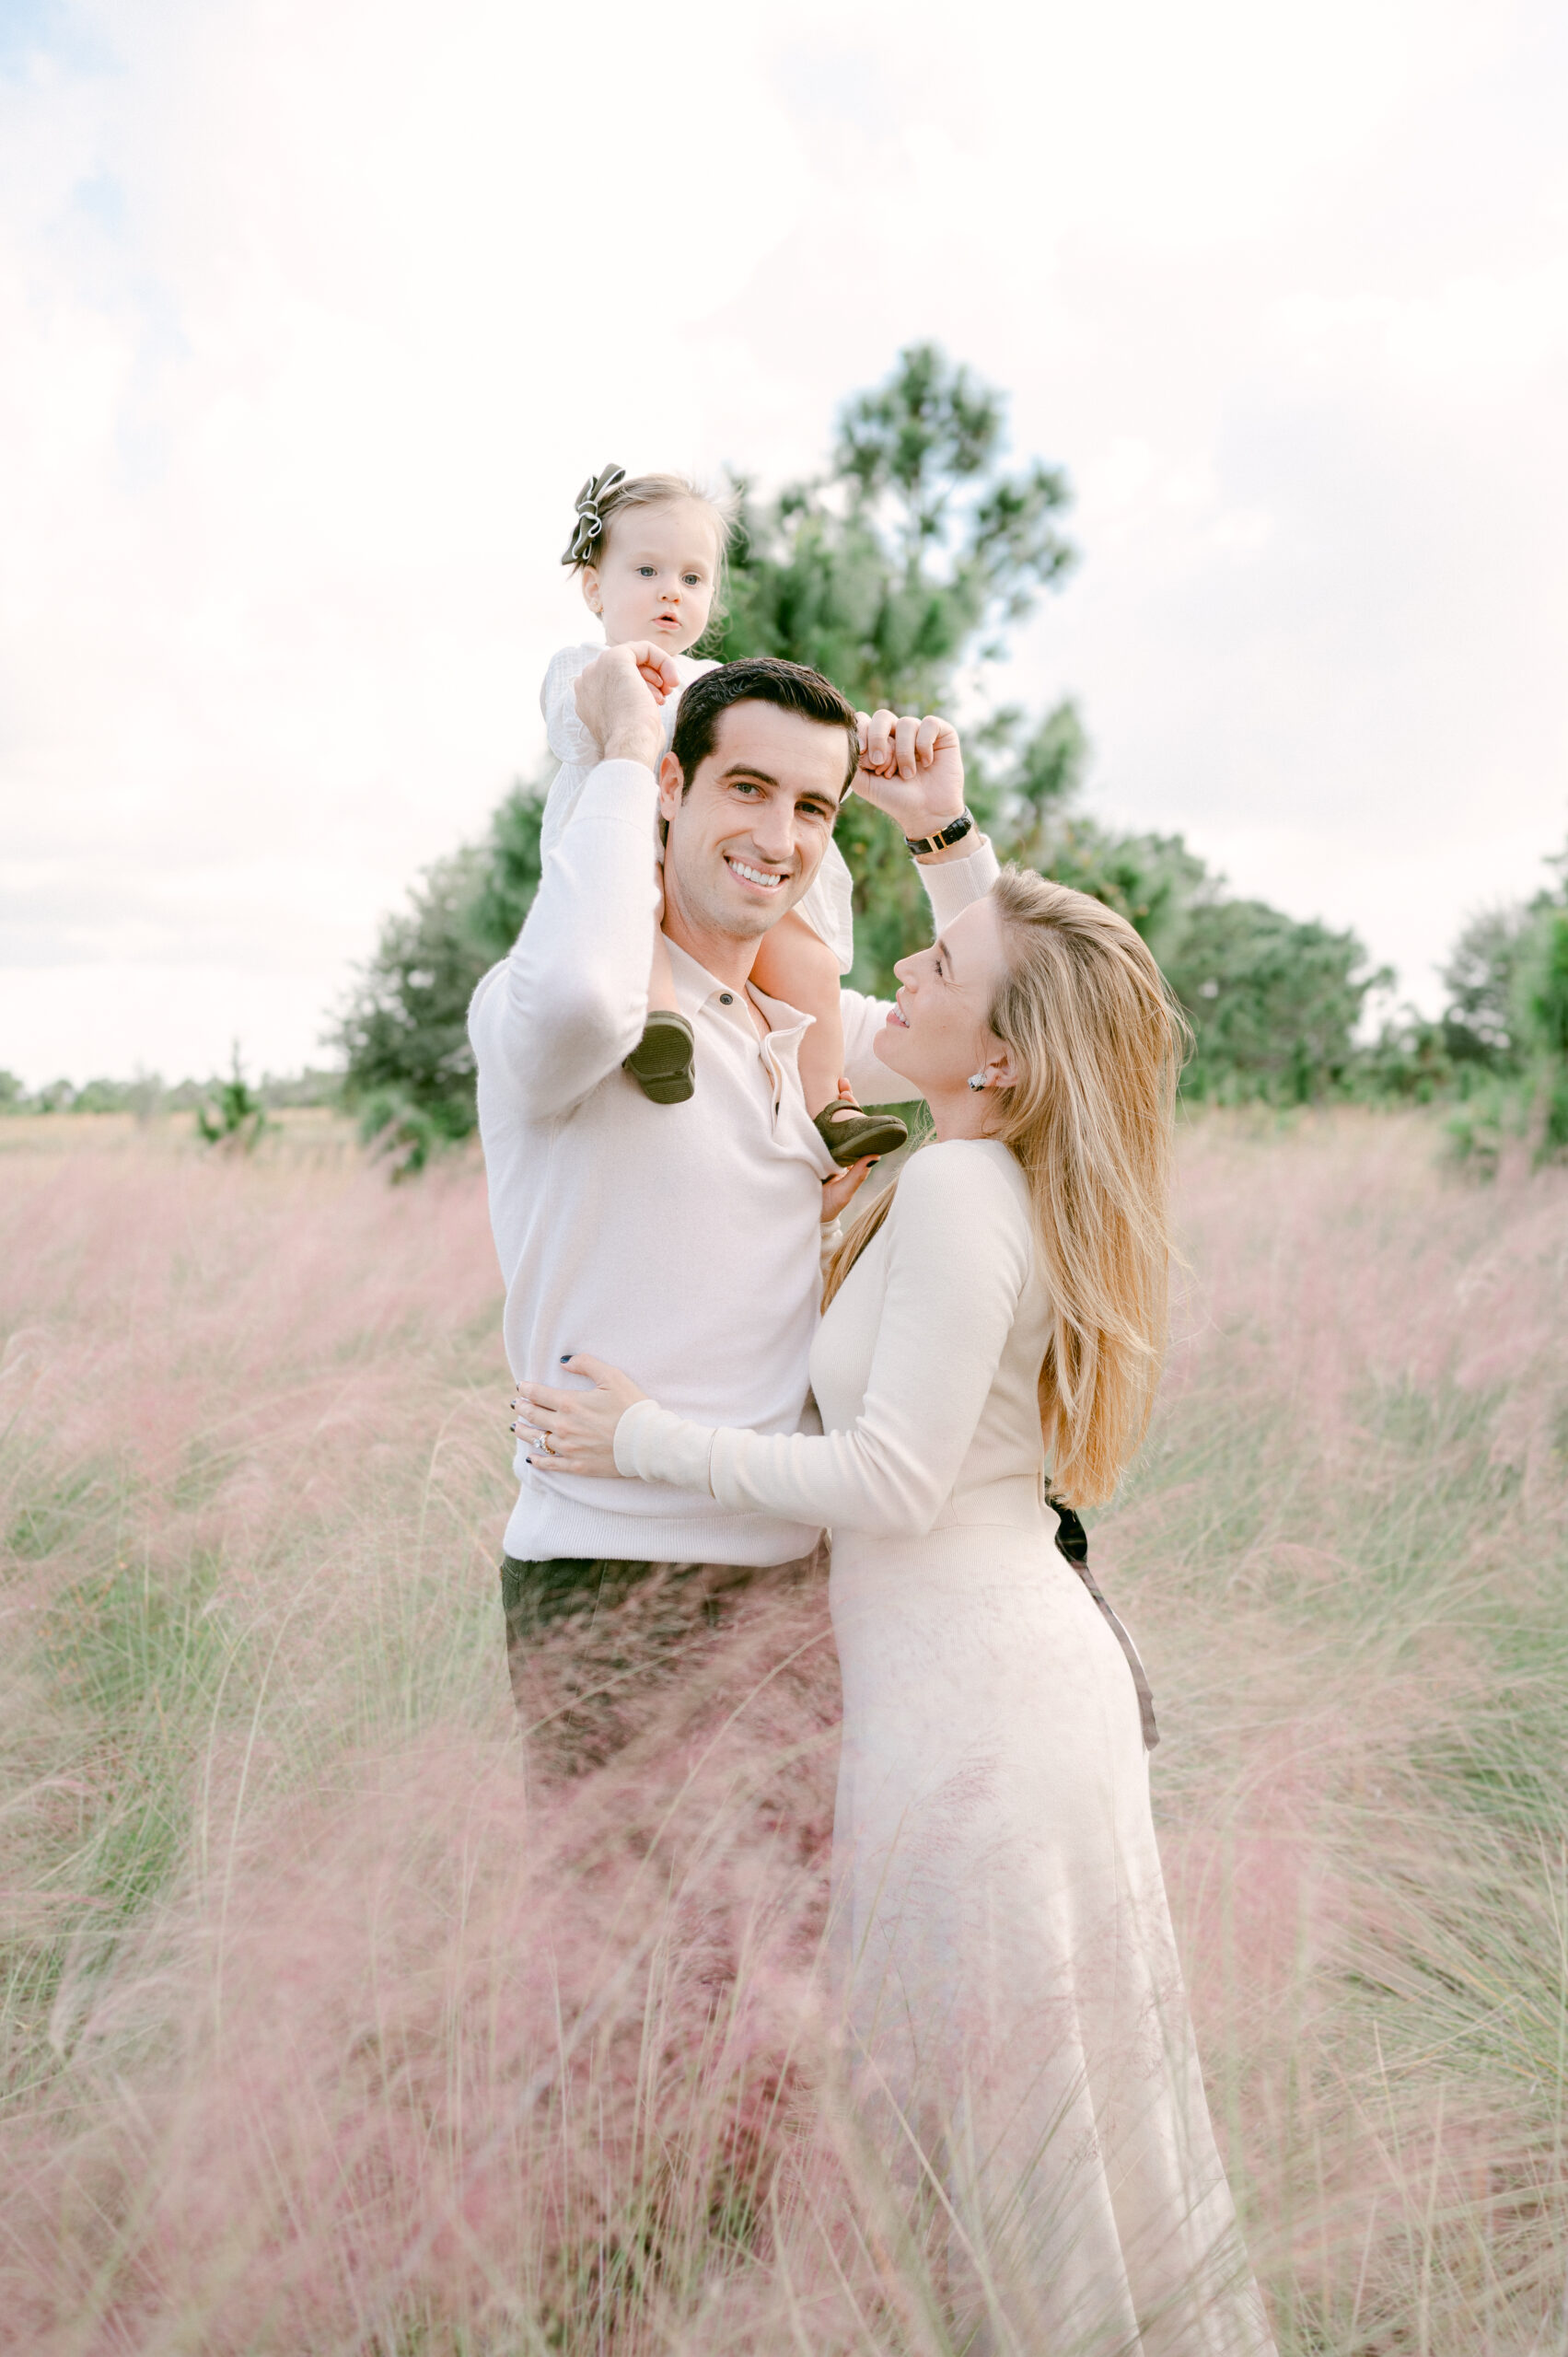 Family photoshoot in Miami's Pink Grass